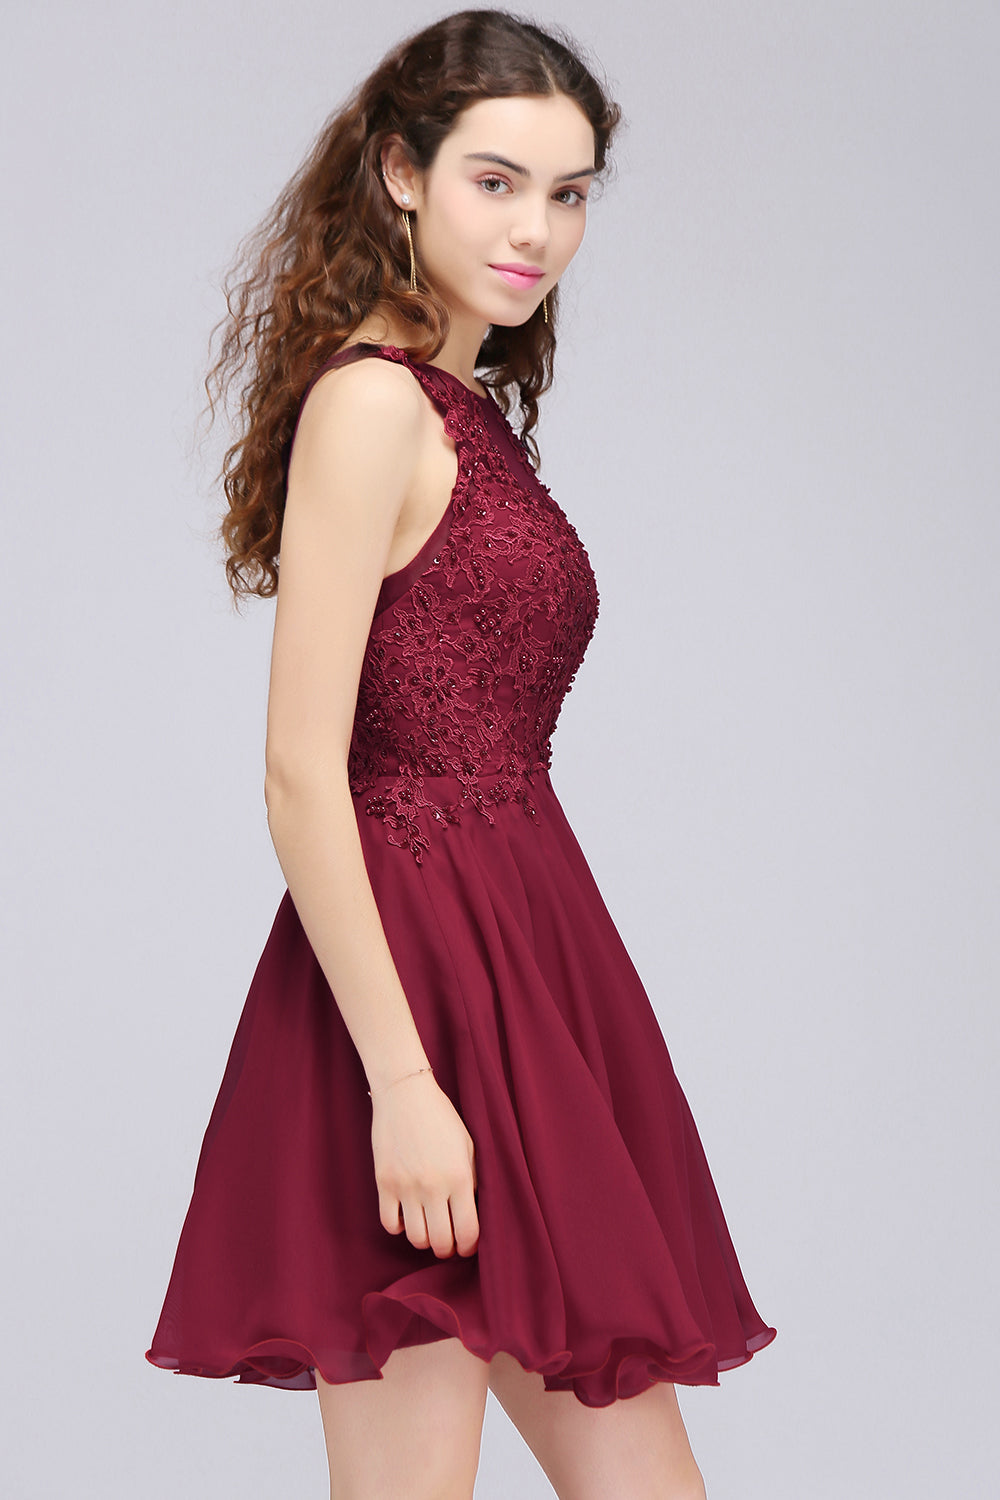 Lovely Lace Short Burgundy Bridesmaid Dress with Appliques